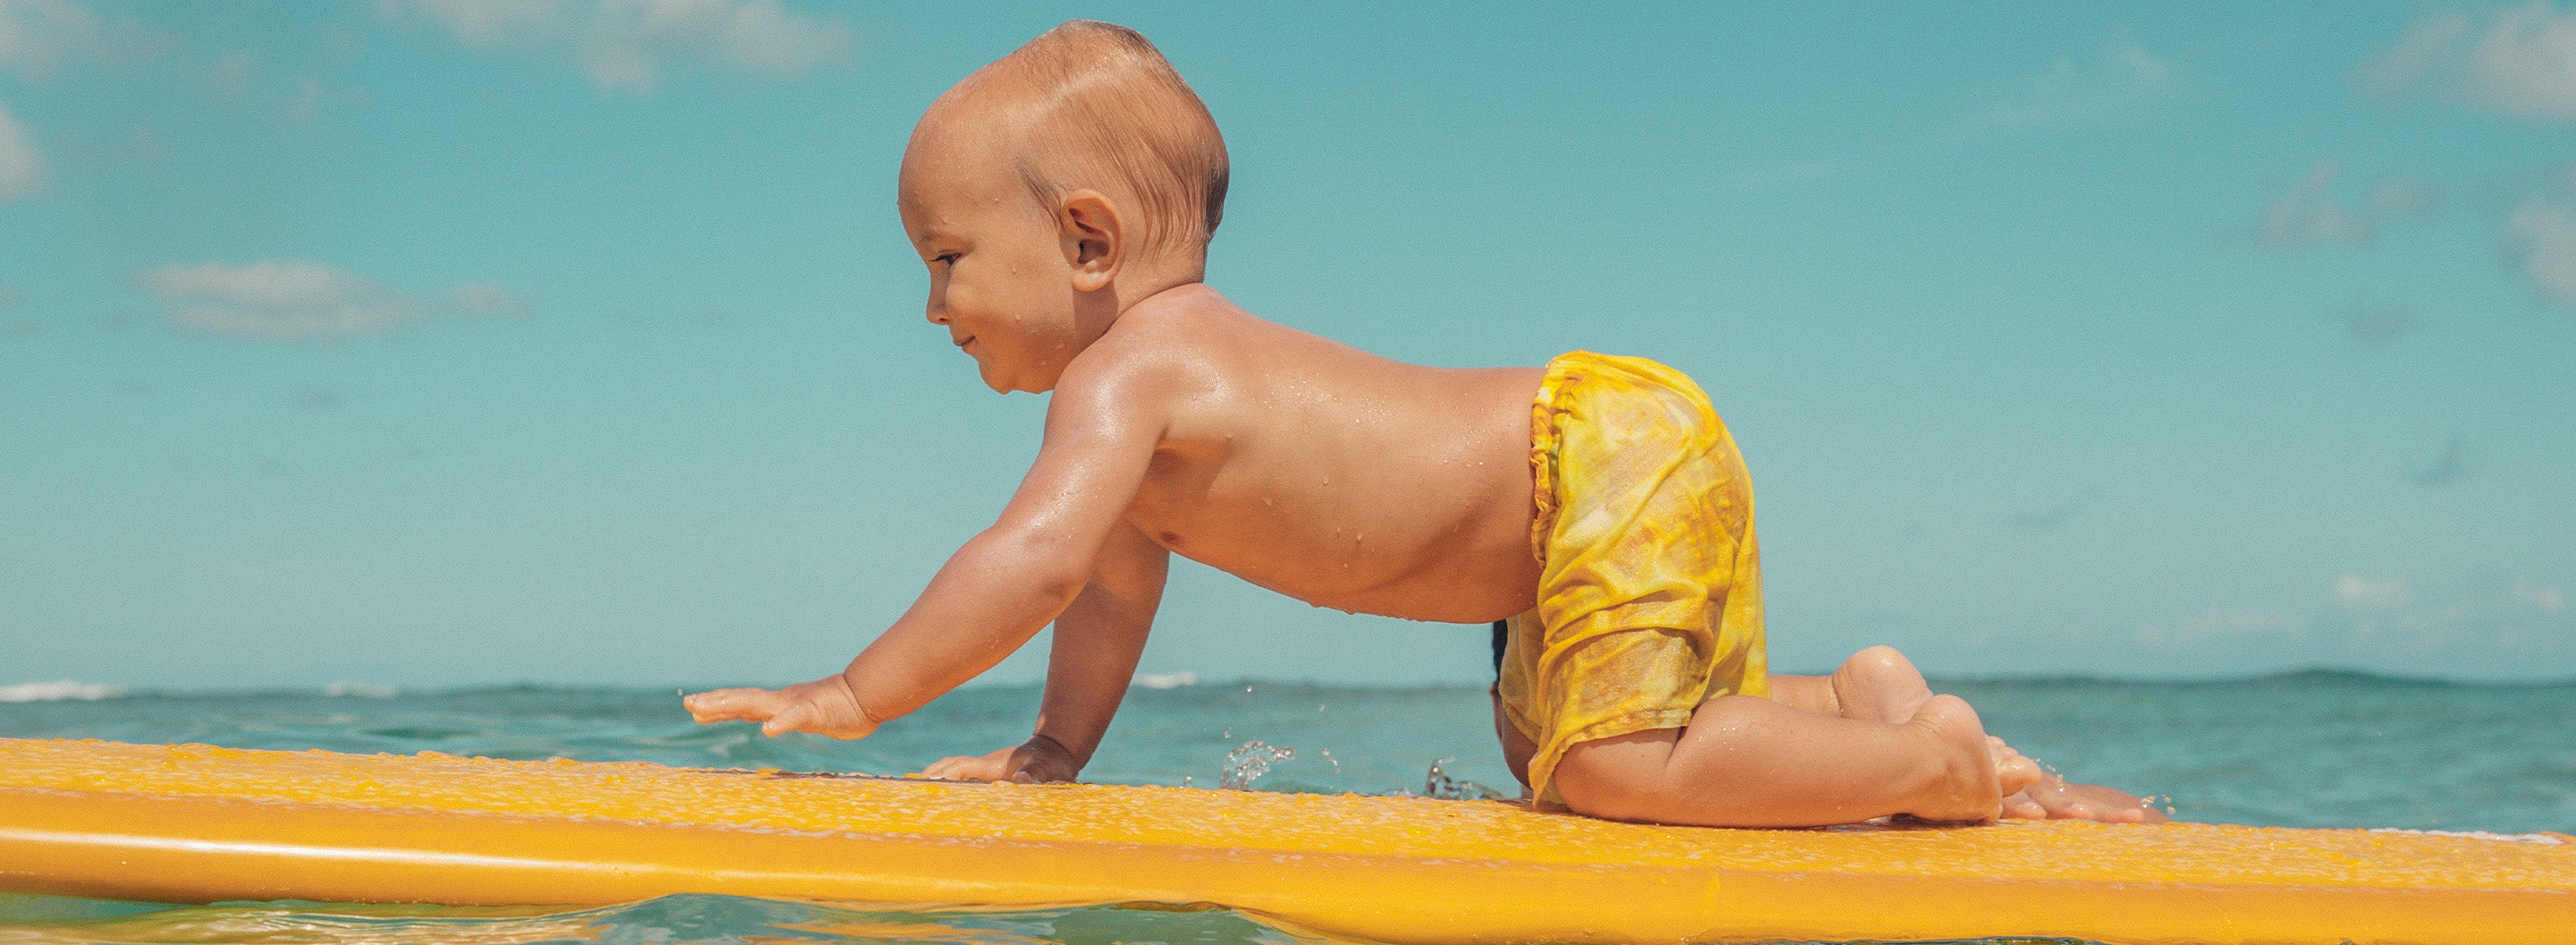 Baby On a Surfboard